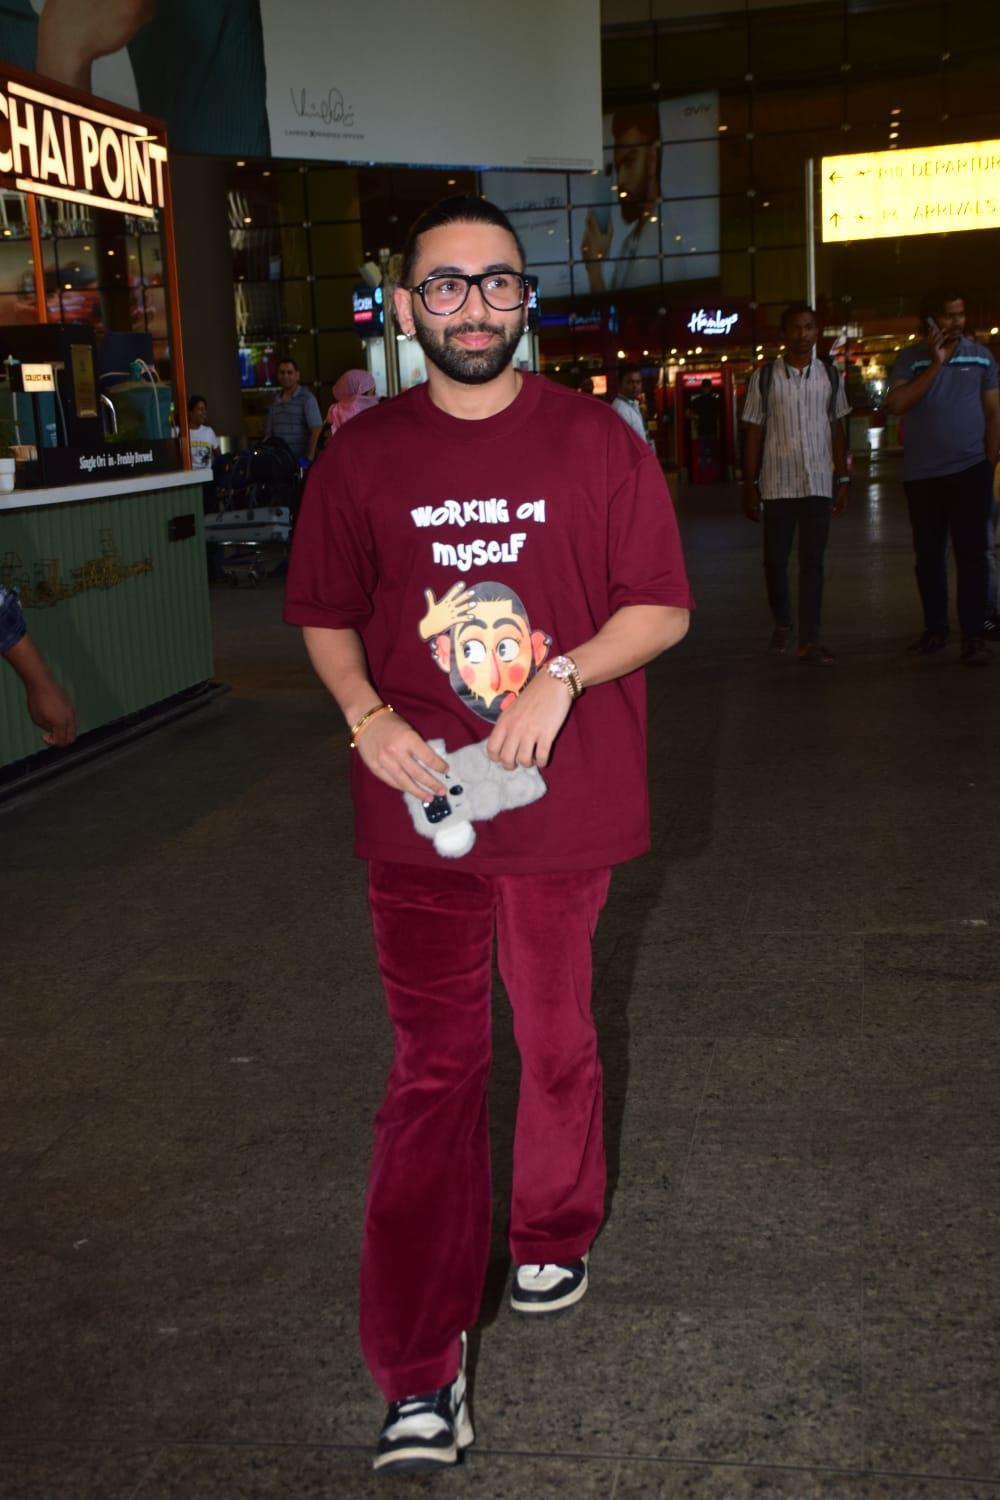 Orry was clicked at the Mumbai airport repping his eye-catching merch